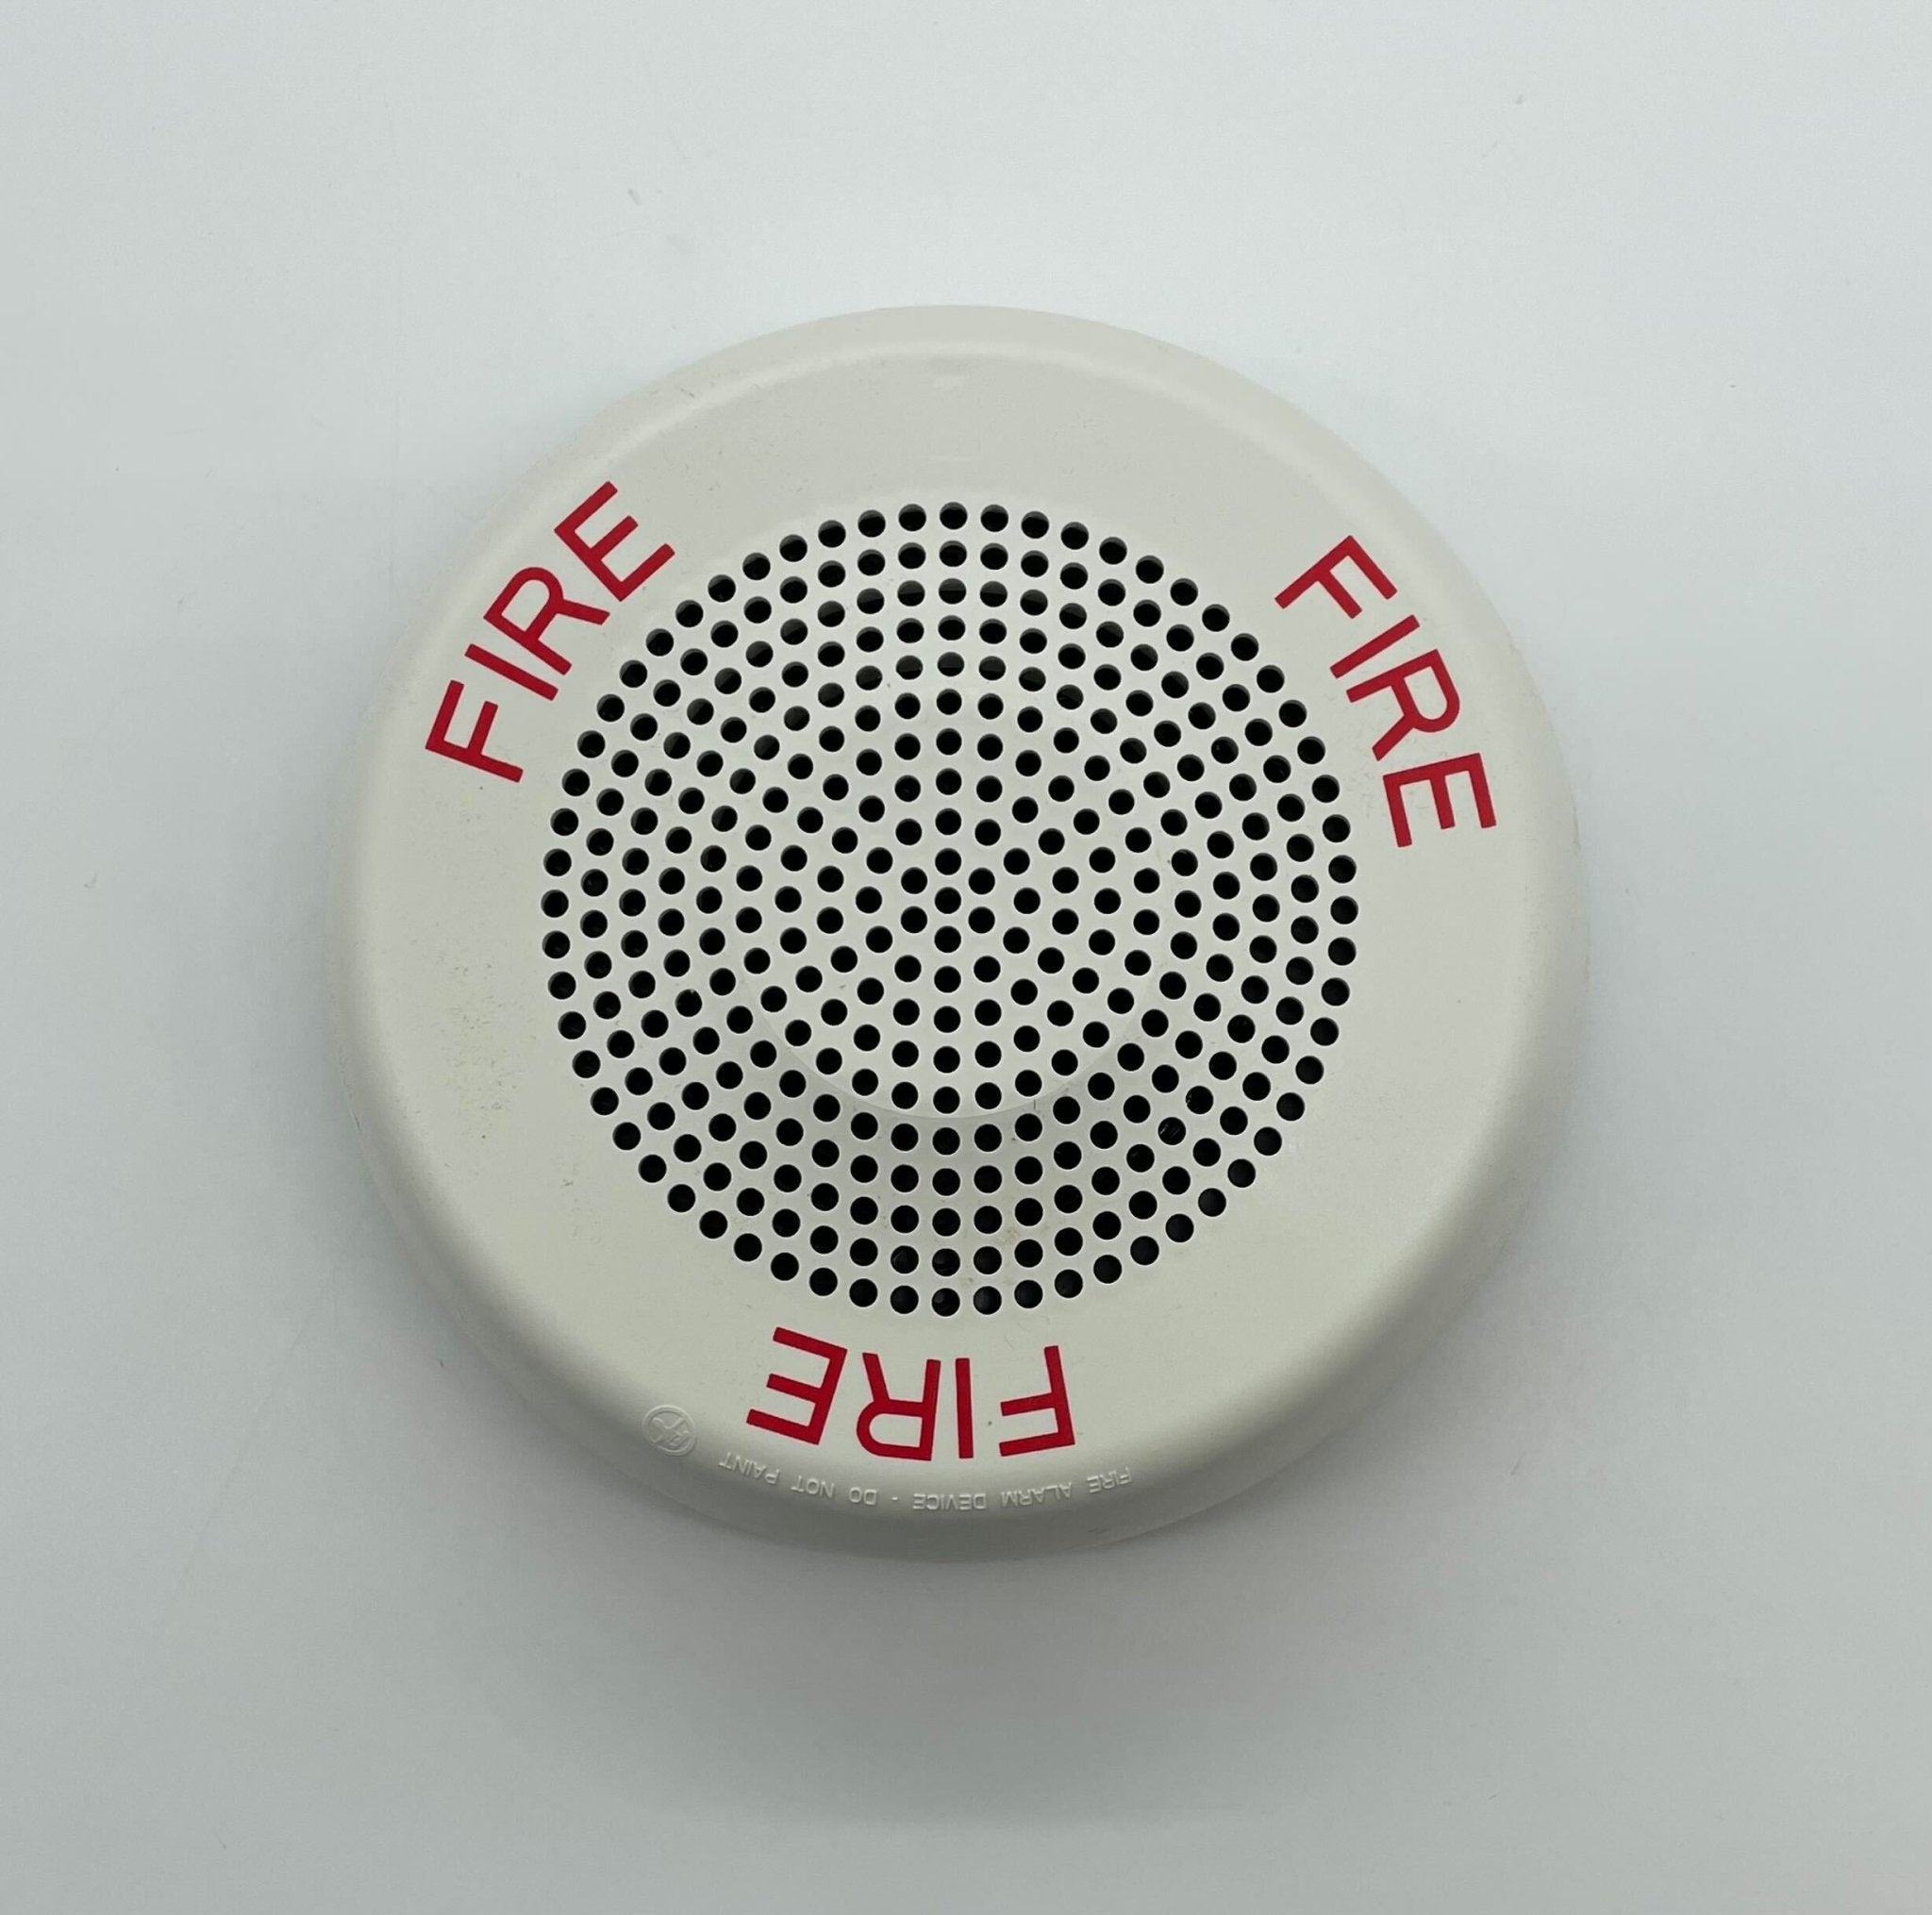 Wheelock ELFHNWC - The Fire Alarm Supplier